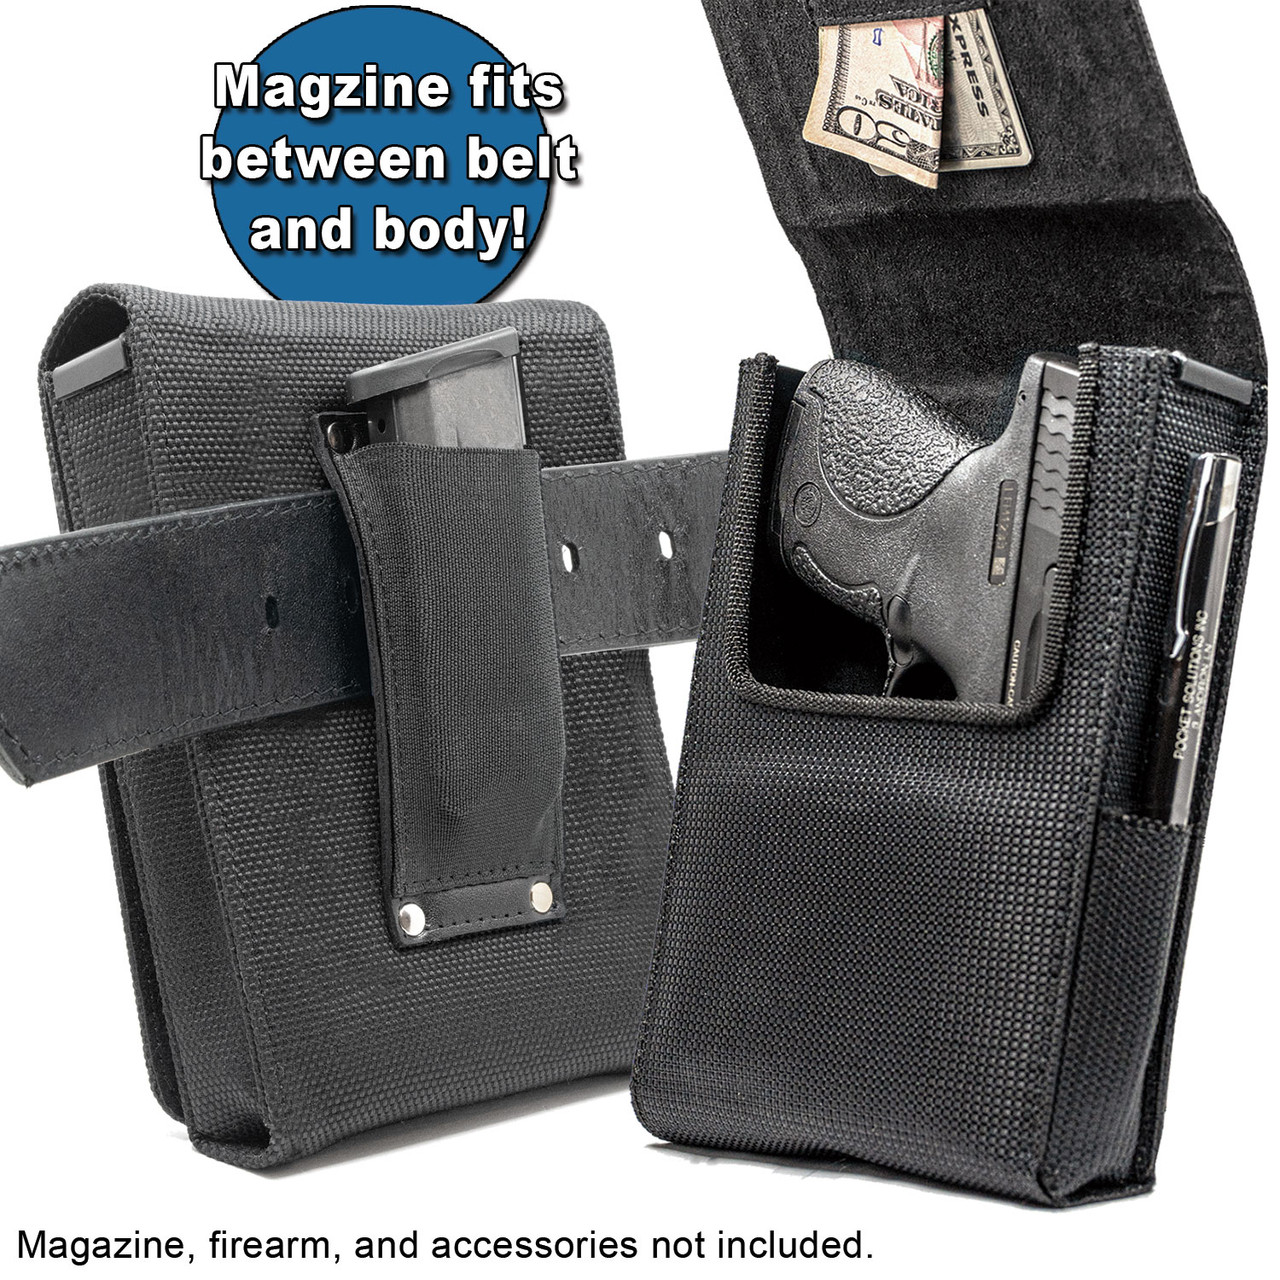 The Walther PPK Max Defense Holster